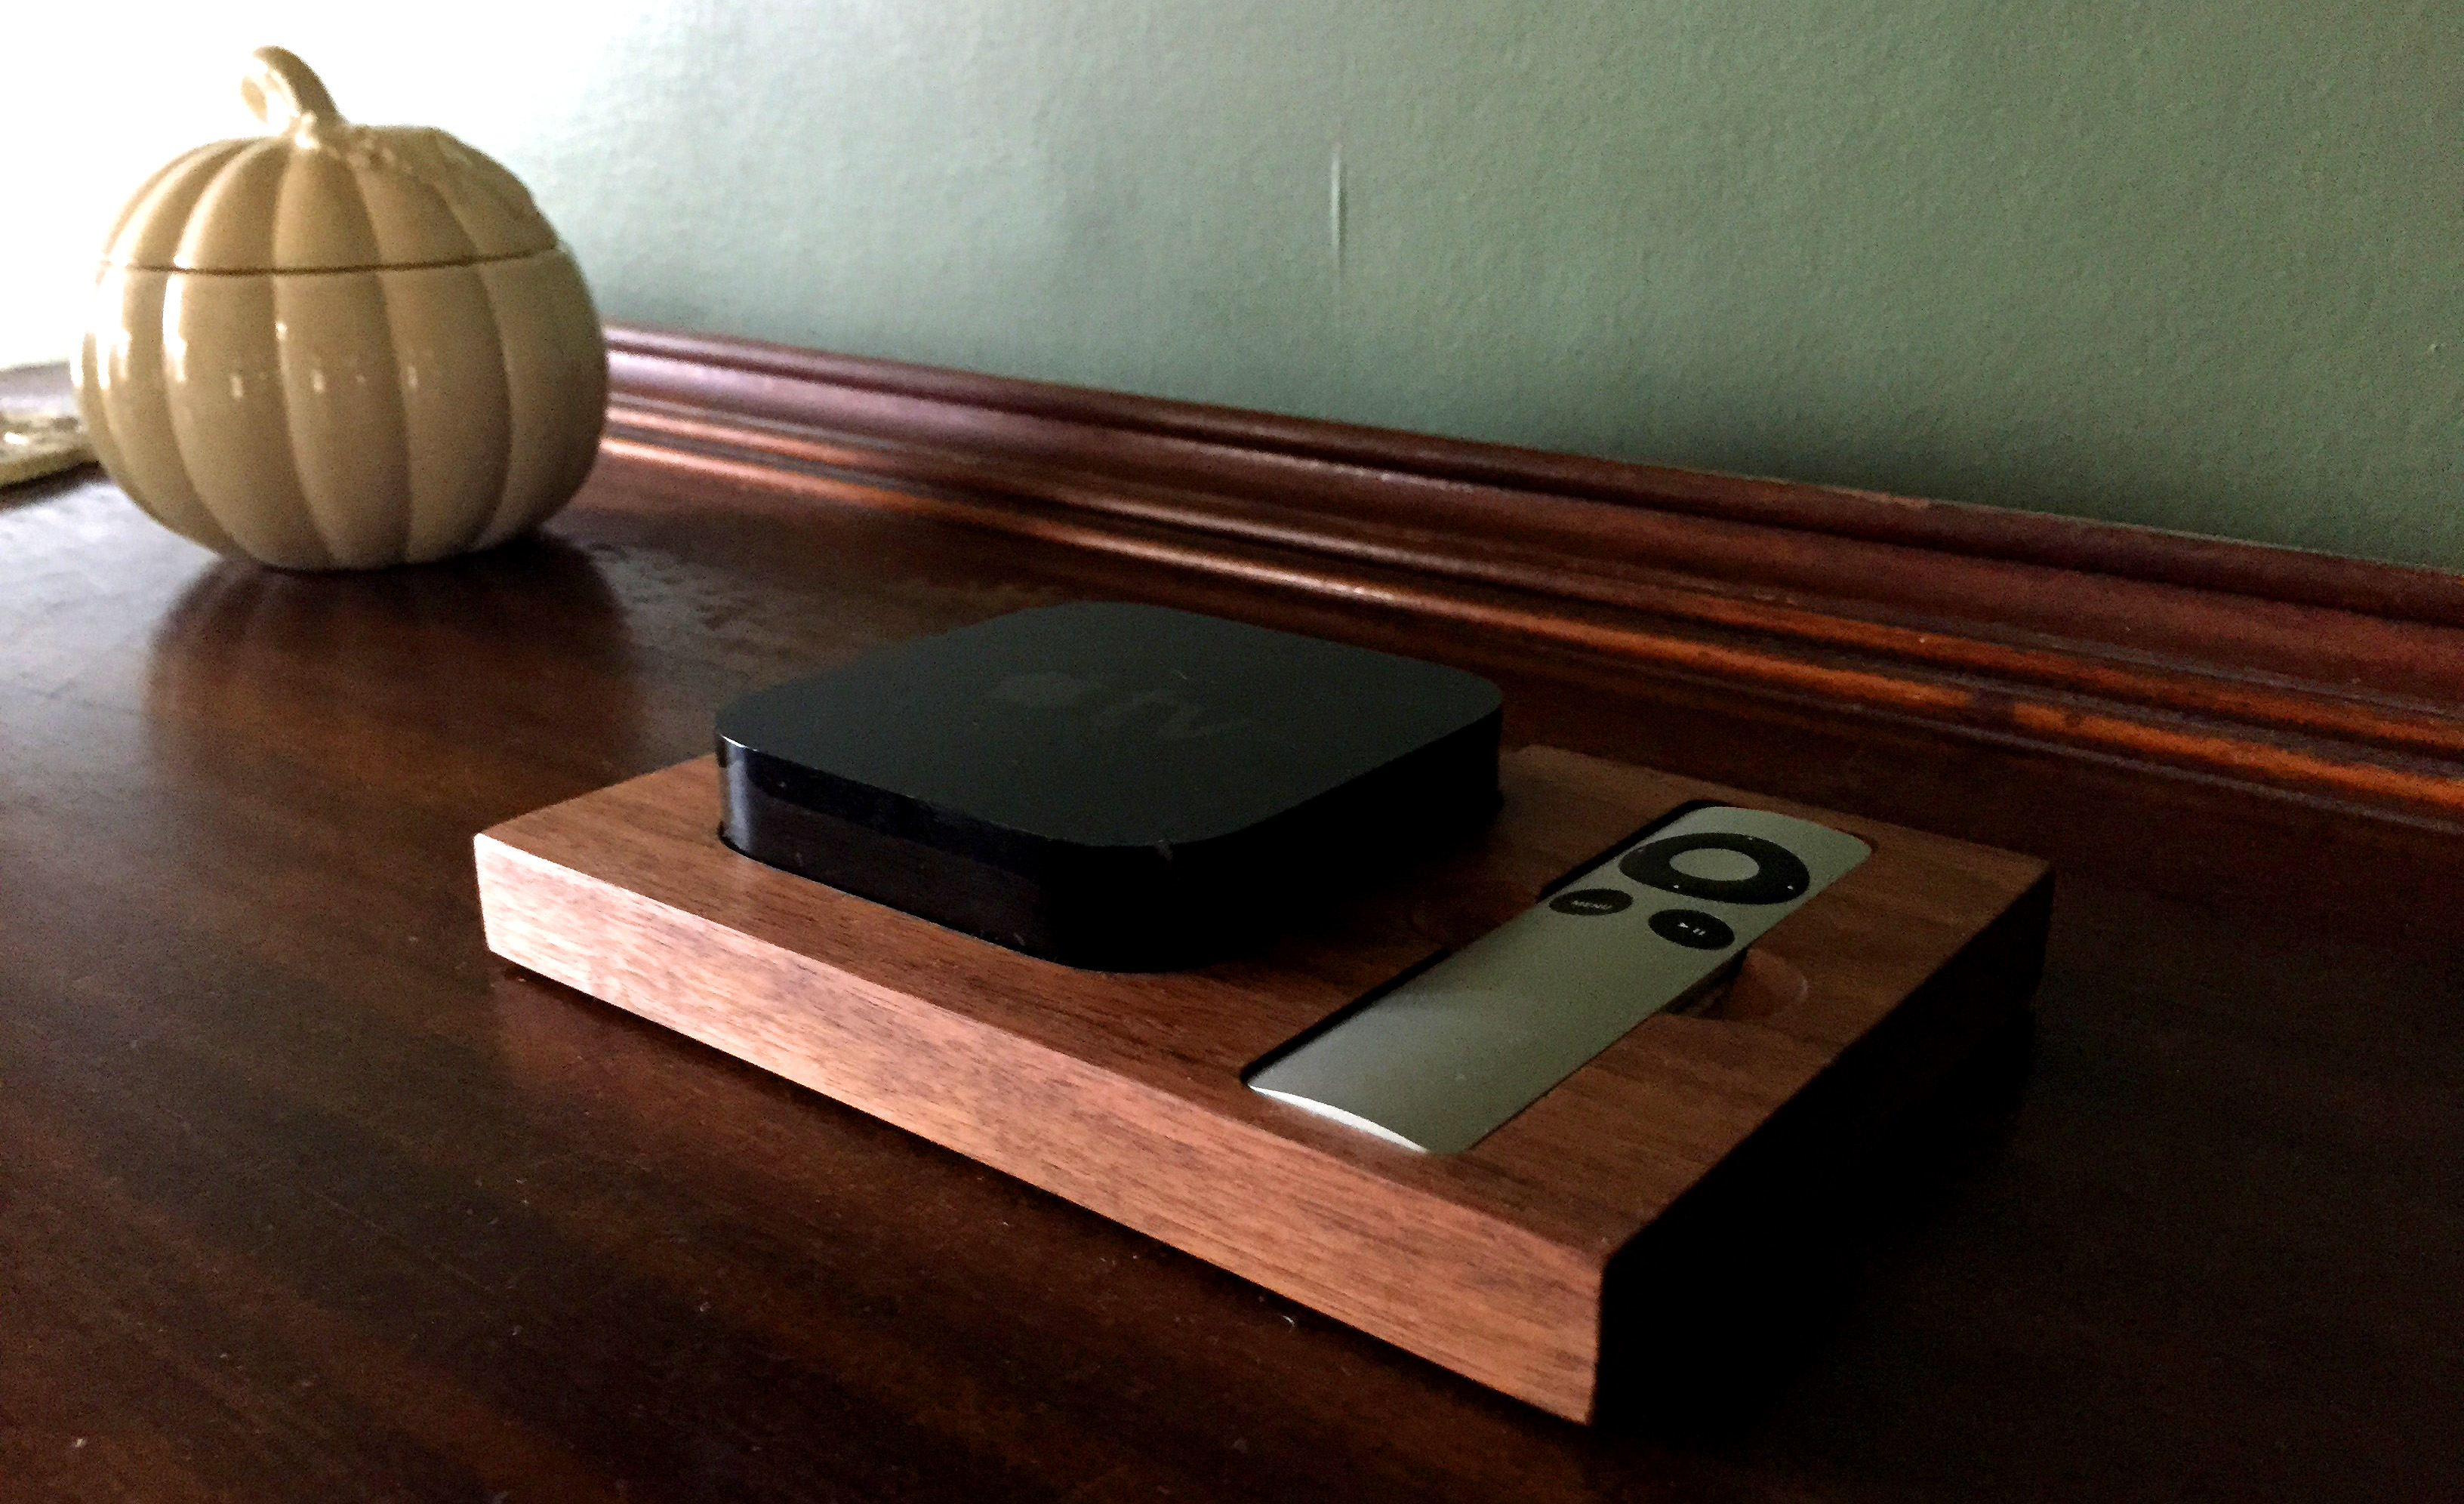 tinsel-and-timber-apple-tv-tray